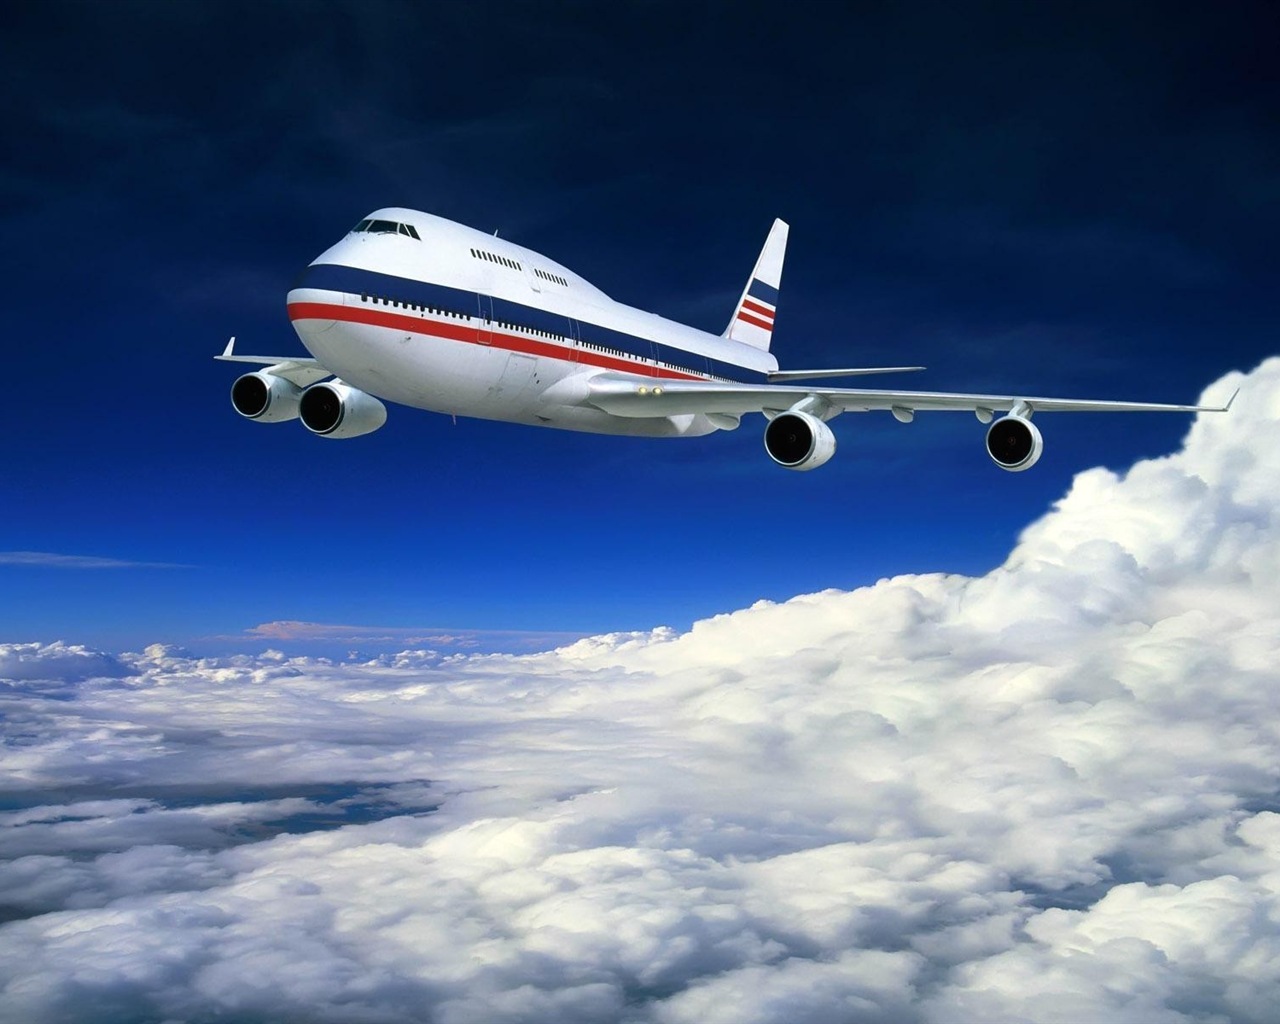 Boeing 747 airliner HD wallpapers #17 - 1280x1024